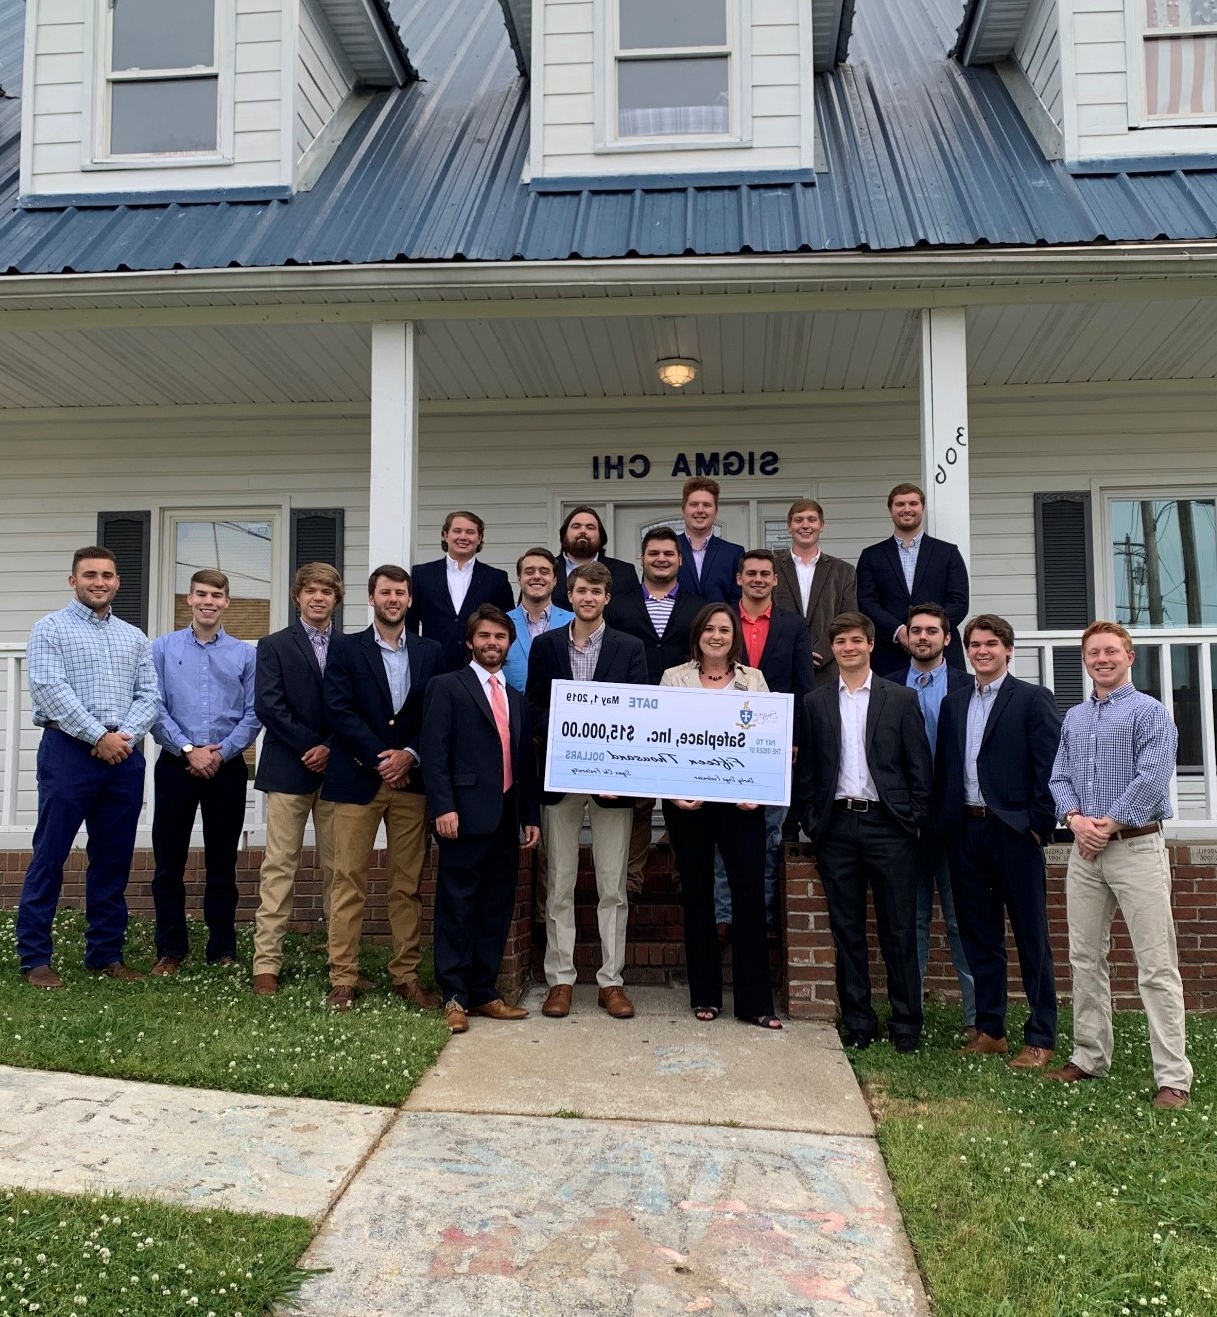 The brothers of sigma chi stand outside their house with a representative from Safe Place, presneting the charity with a $15,000 check from the fraternity's derby days competition.